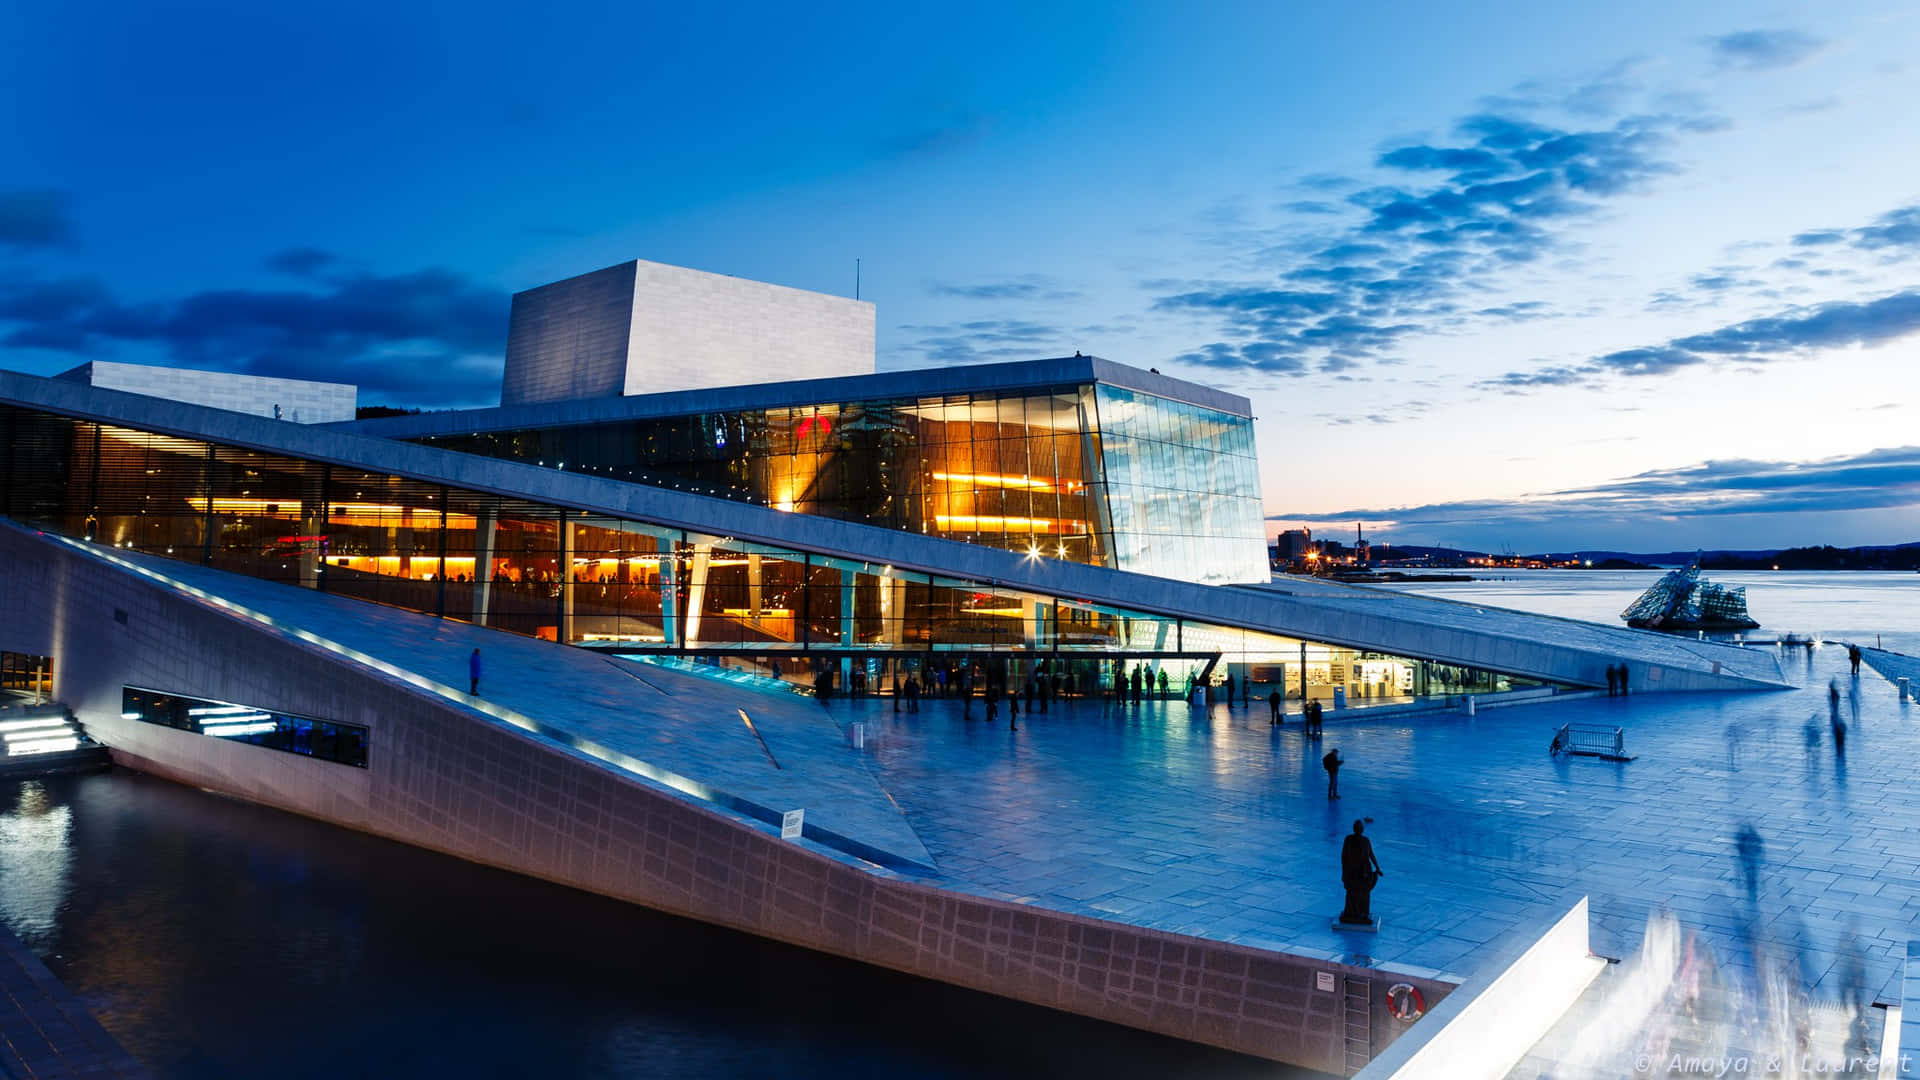 Oslo Opera House In The Evening Wallpaper